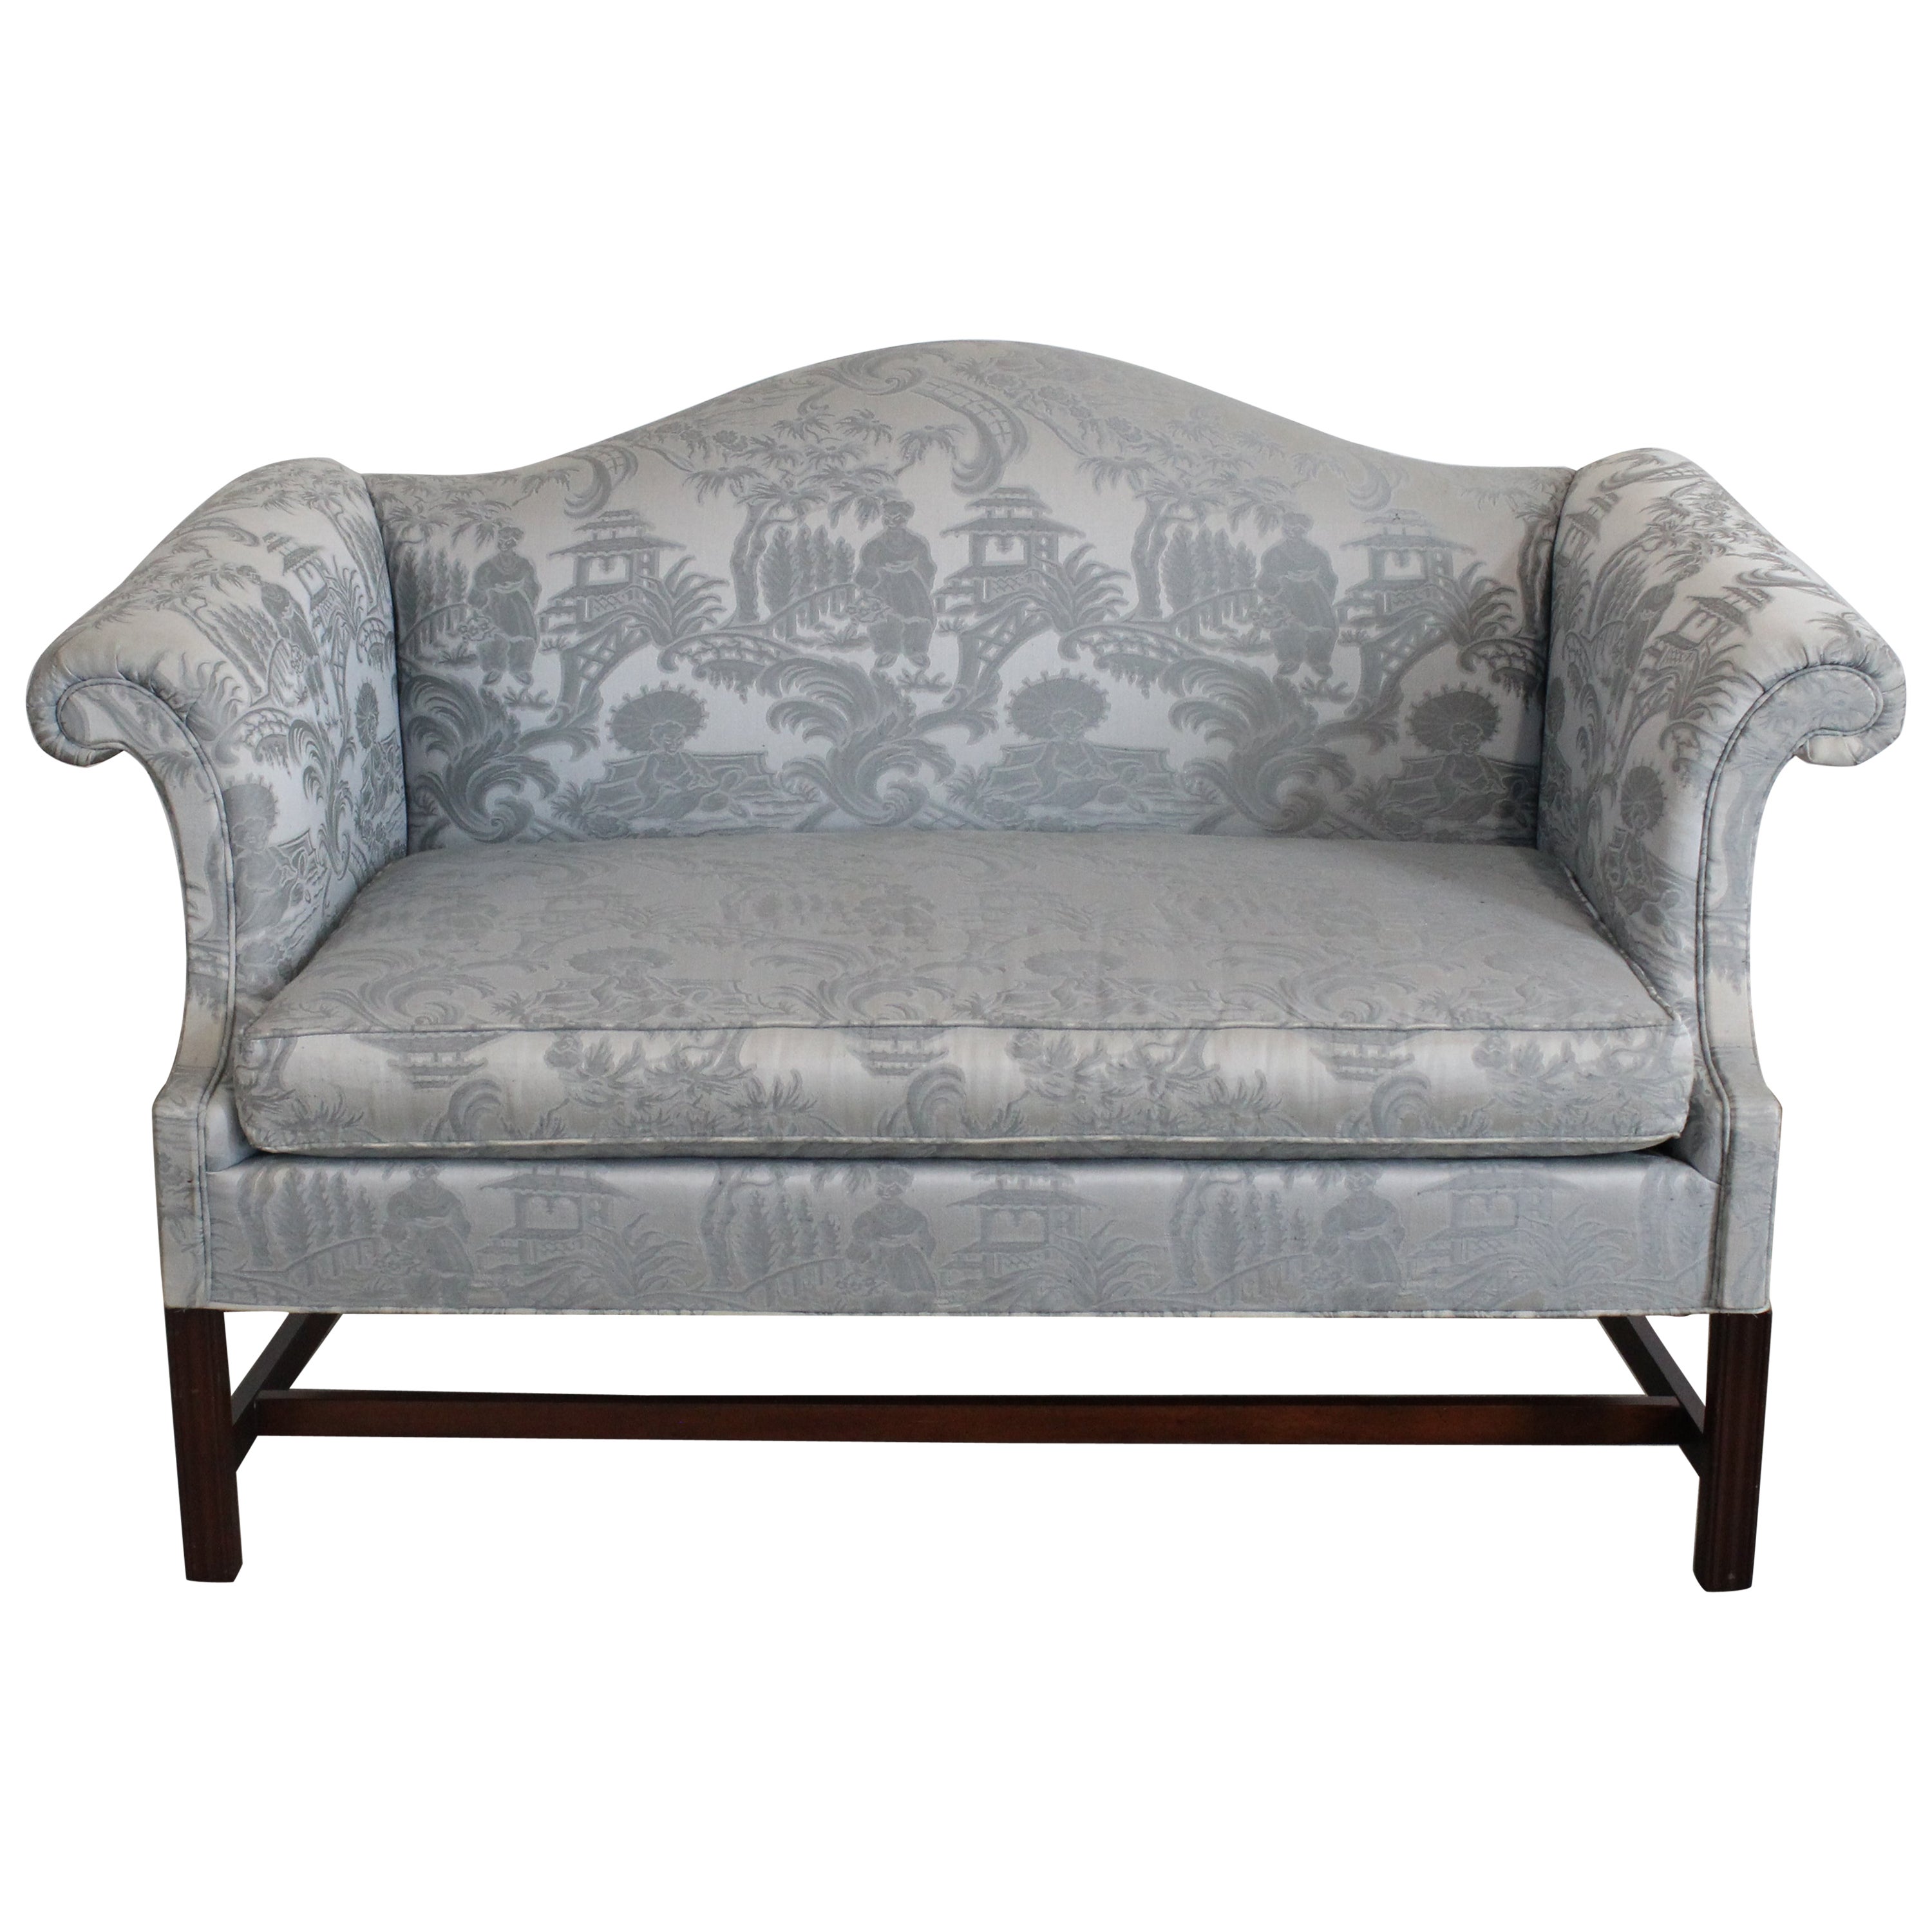 Vintage Chippendale Chinese Camelback Love Seat/Sofa by Hickory Chair Co